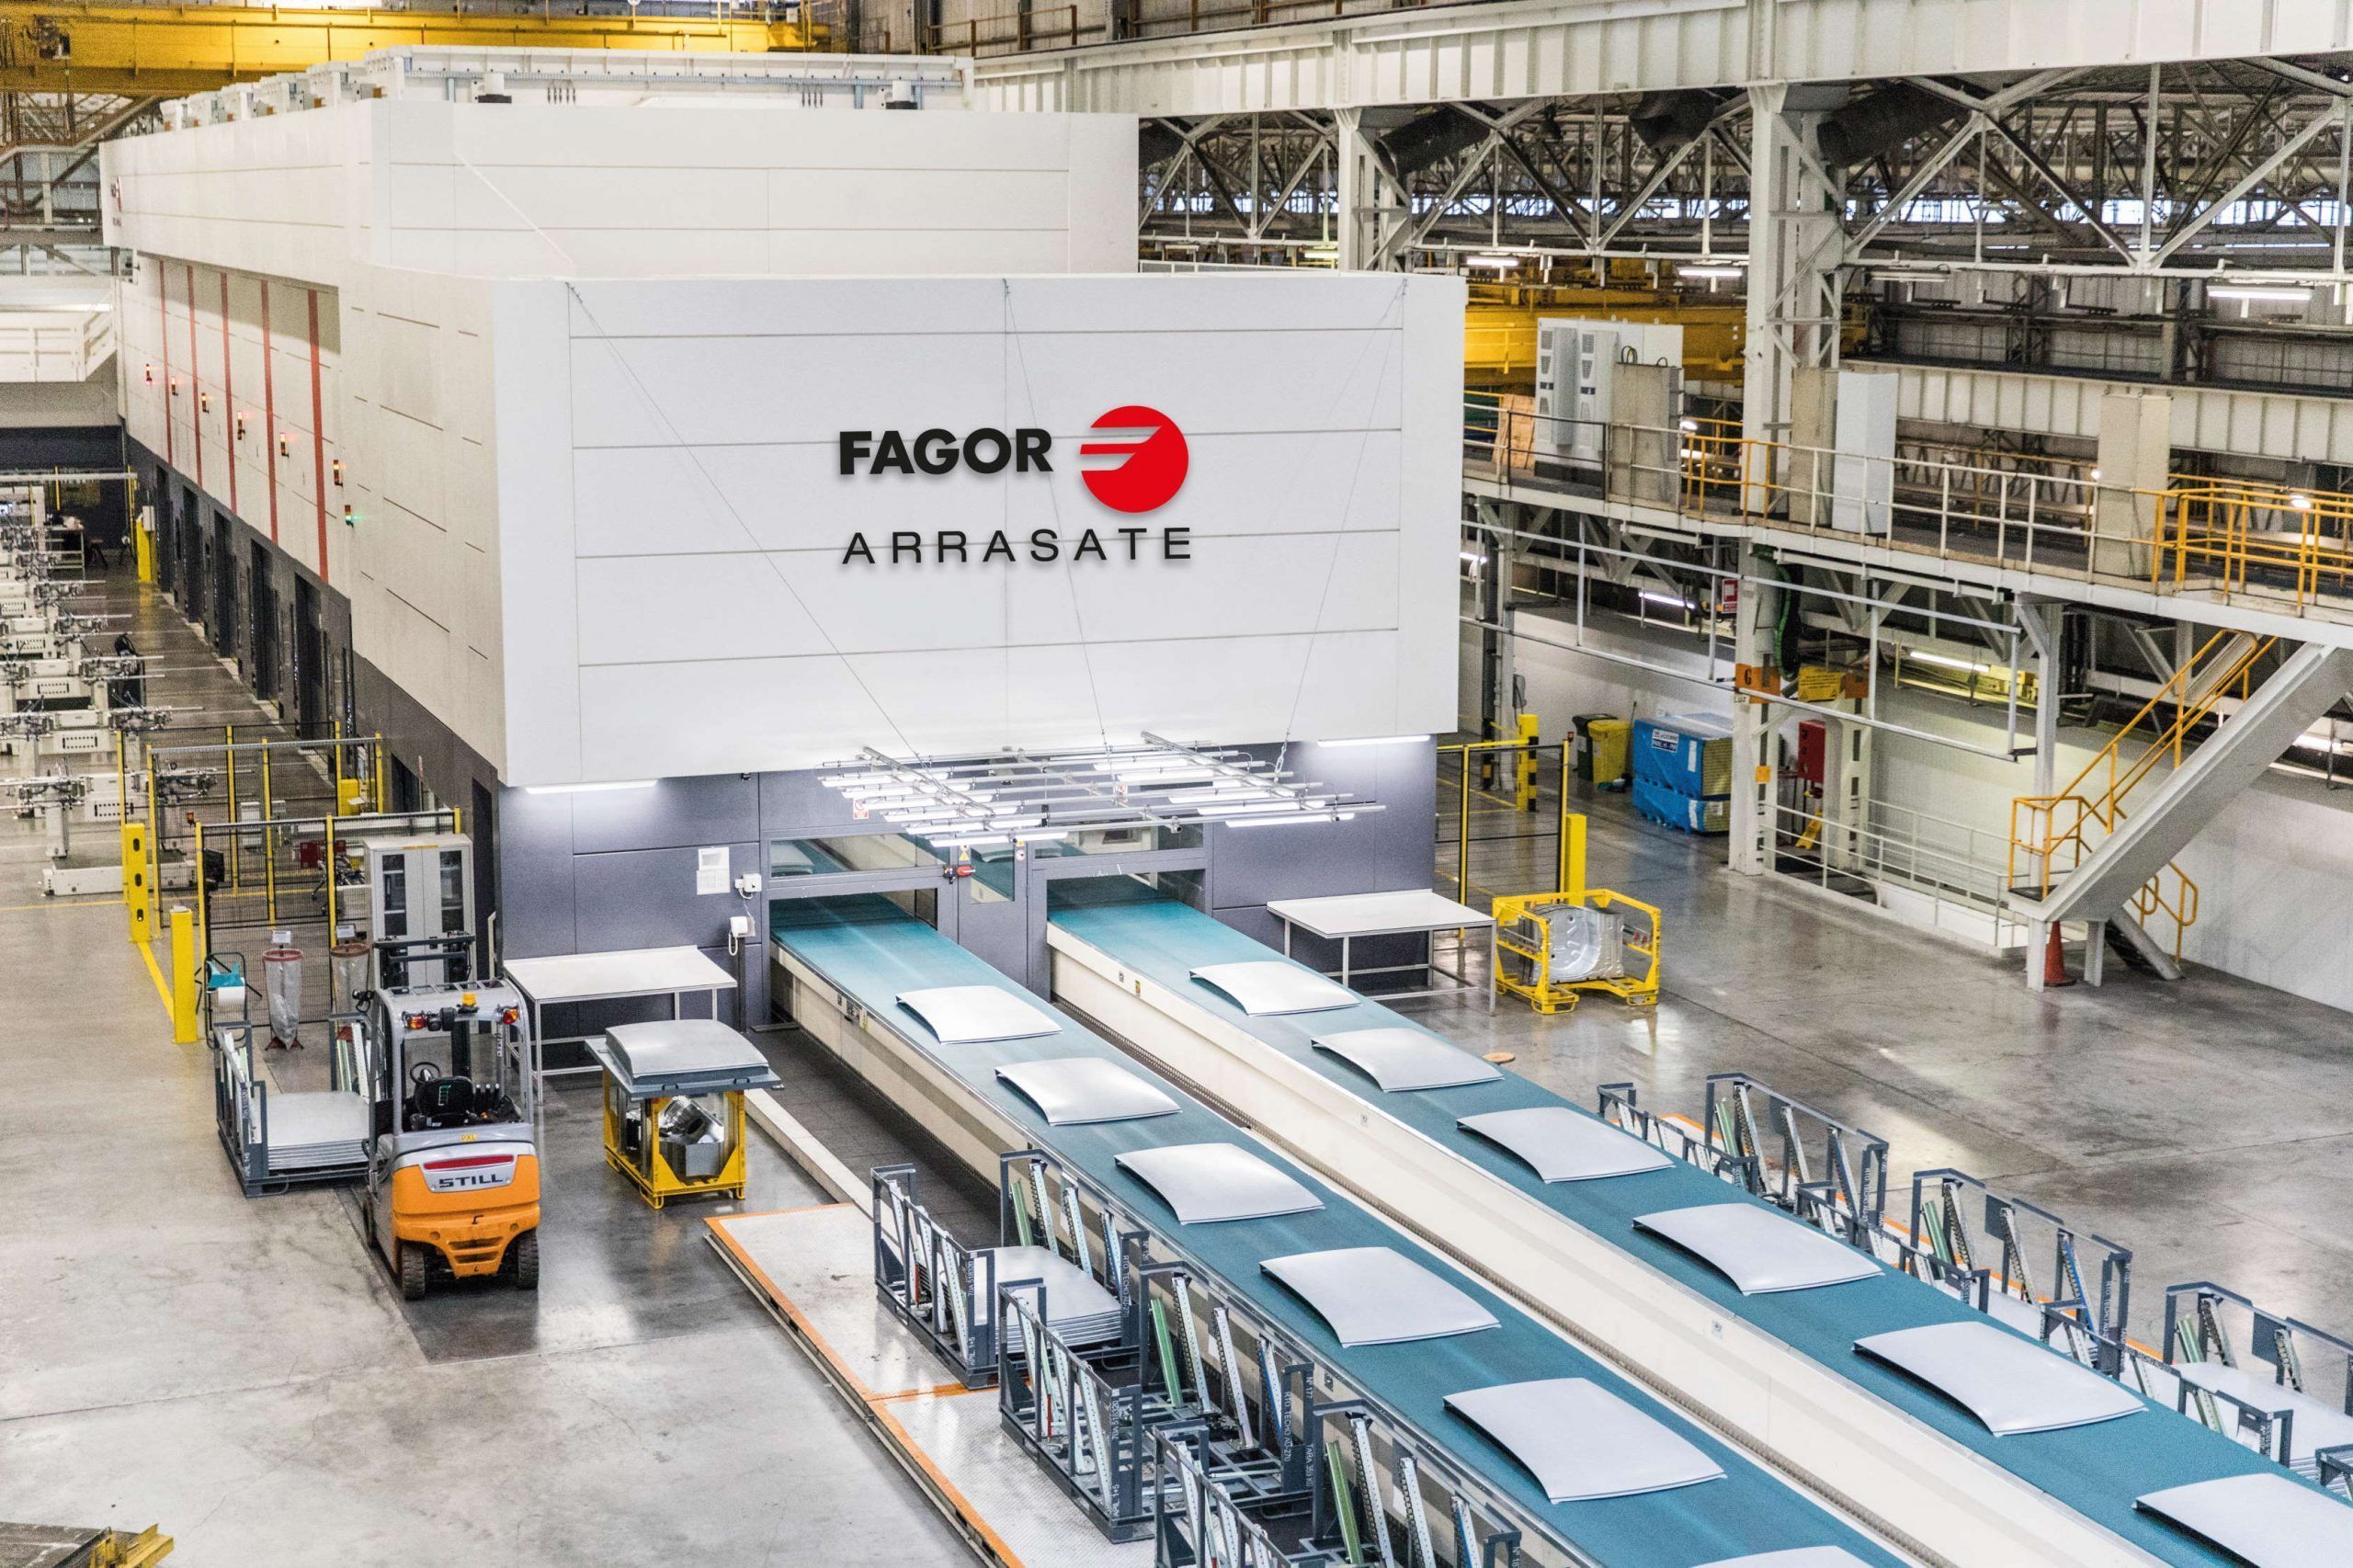 Fagor Arrasate event: FAGOR ARRASATE TO SUPPLY VINFAST WITH A HIGH-SPEED PRESS LINE IN VIETNAM